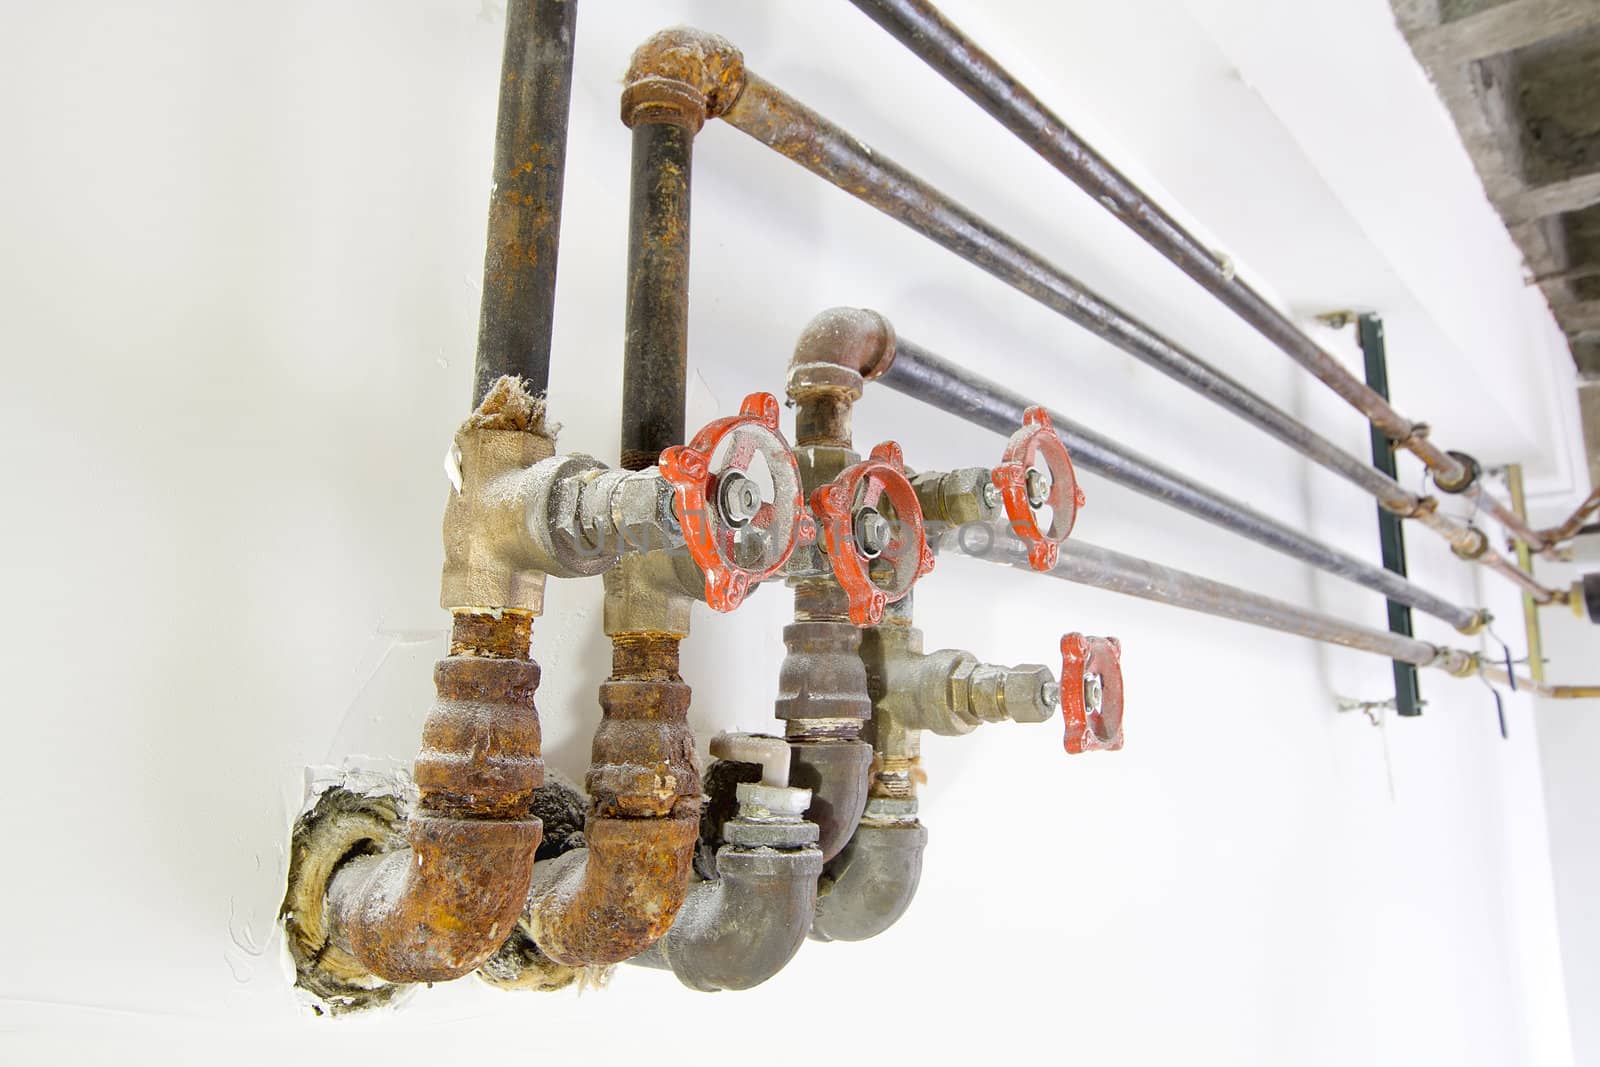 Old Heating Cooling Water Plumbing Pipes with Valves on White Wall